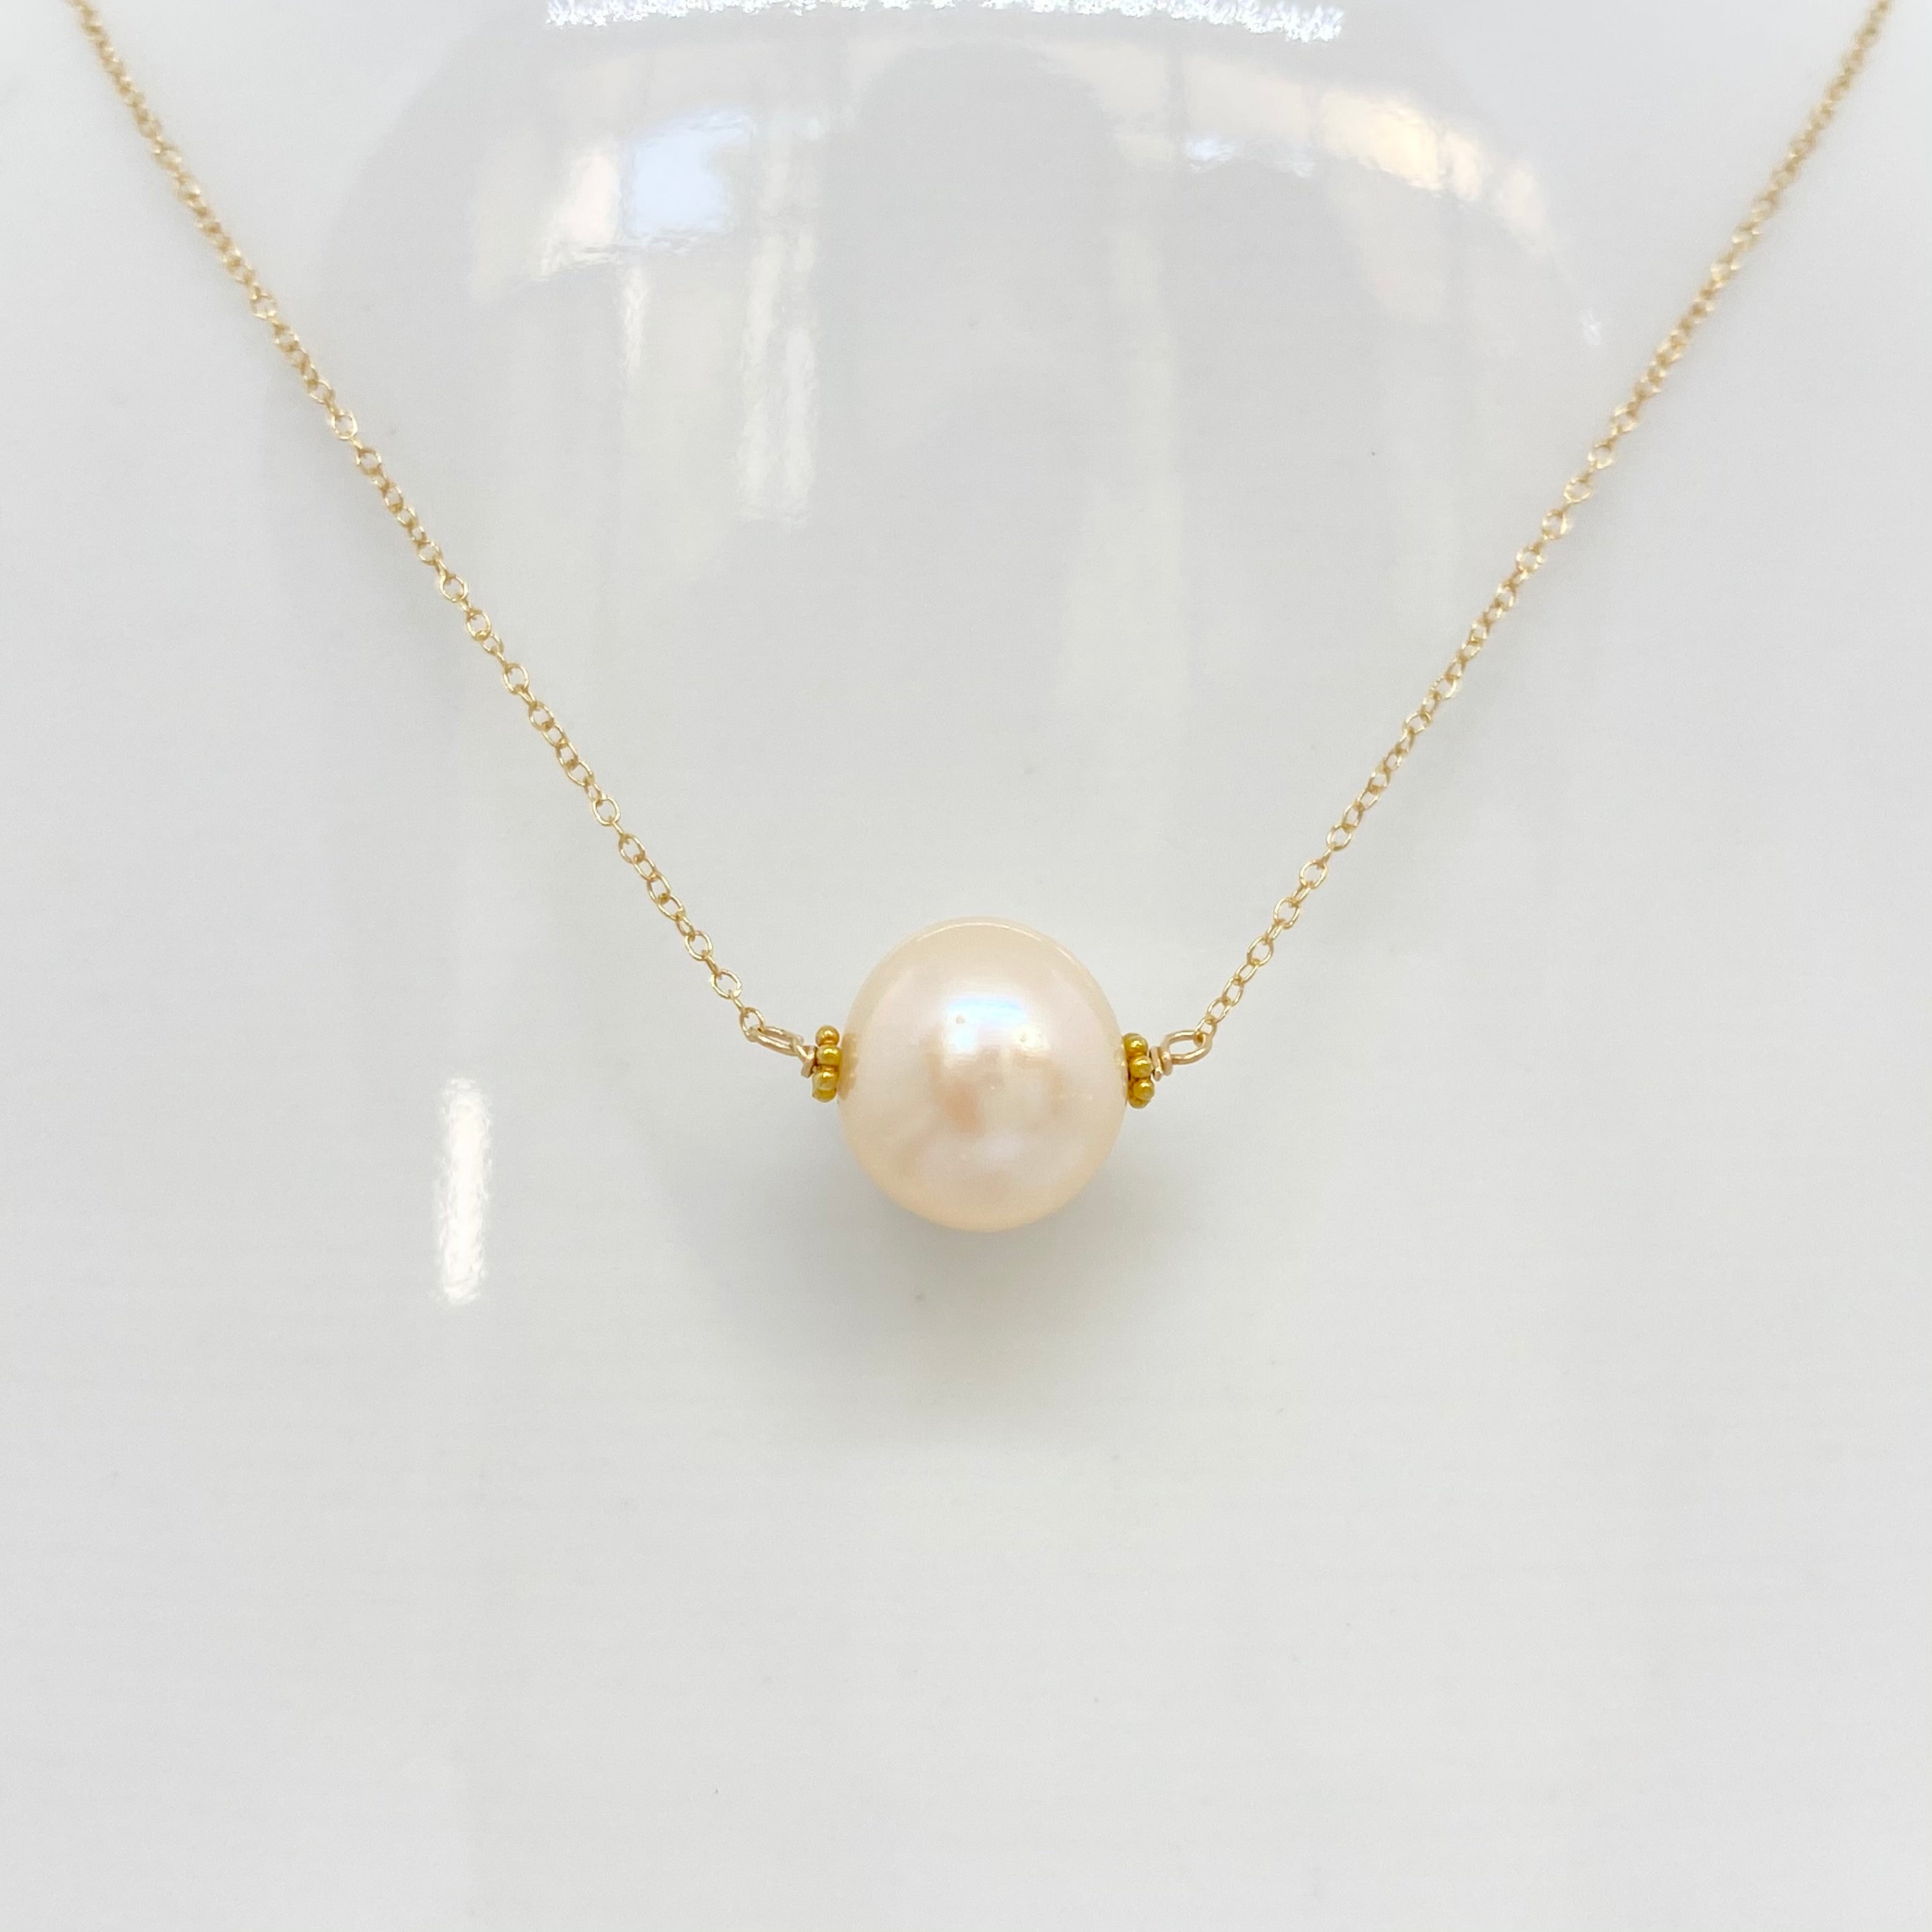 14k Gold Chain Necklace w/ Freshwater Pearl & 18k Gold Daisies